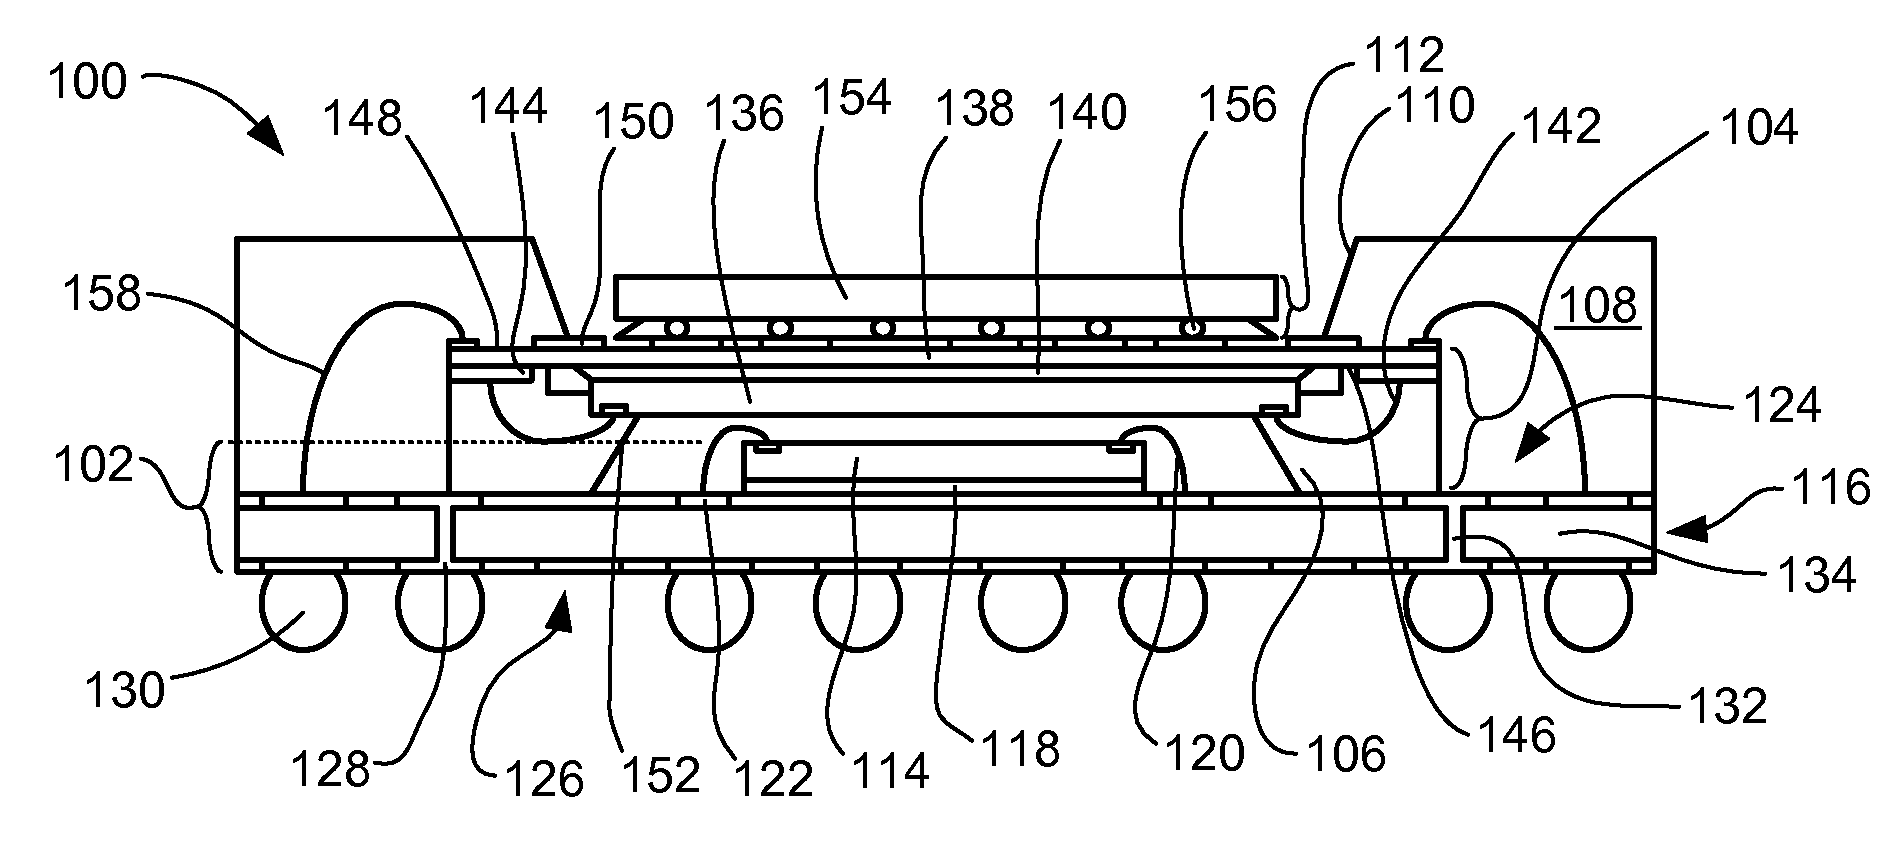 Integrated circuit package-in-package system